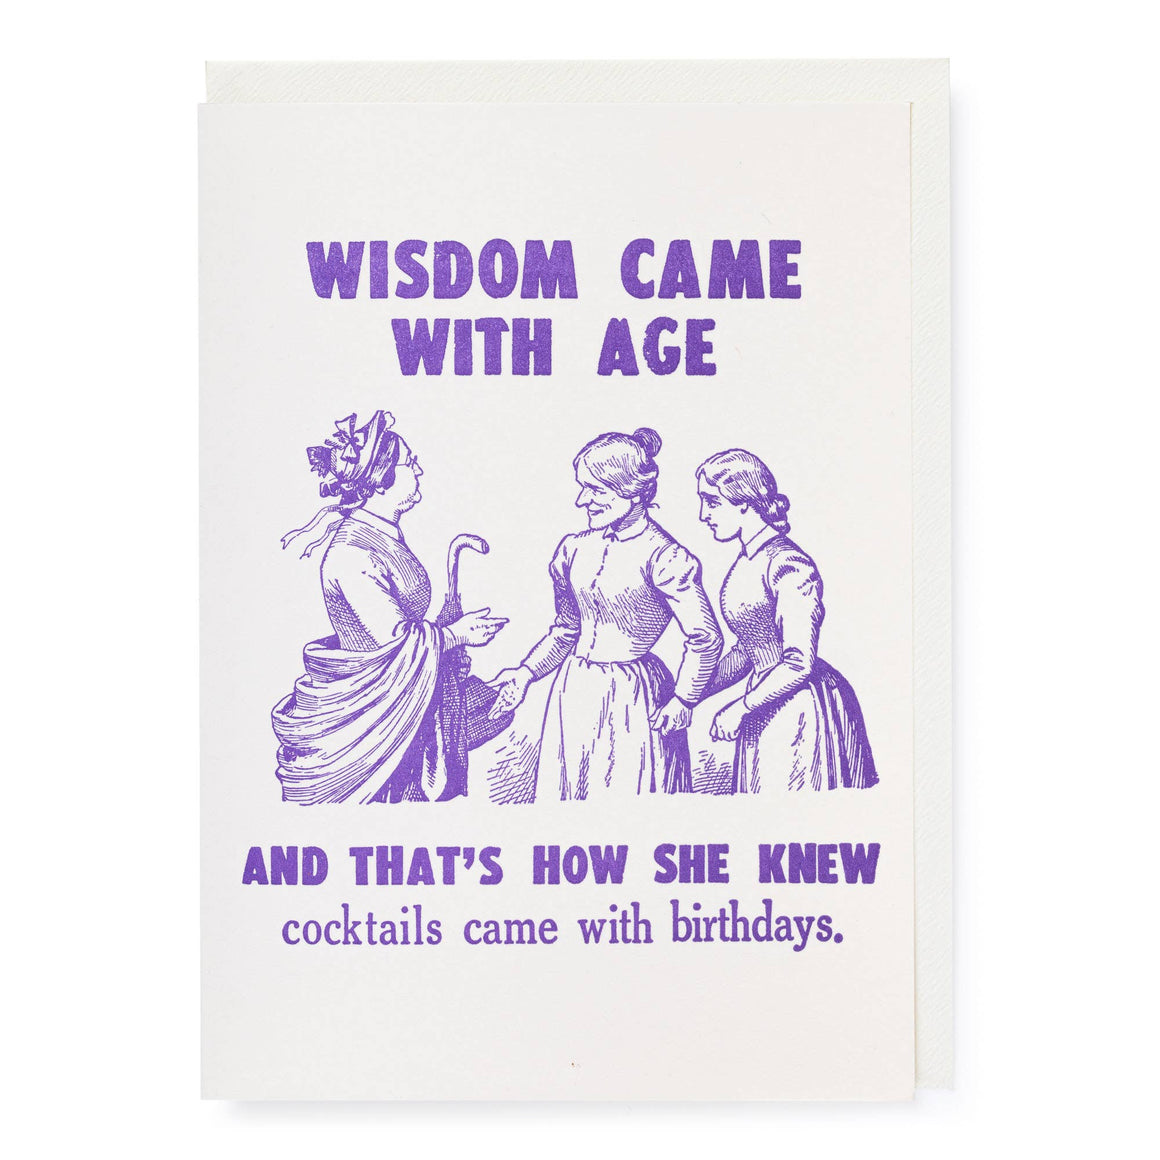 Wisdom came with age Greeting Card